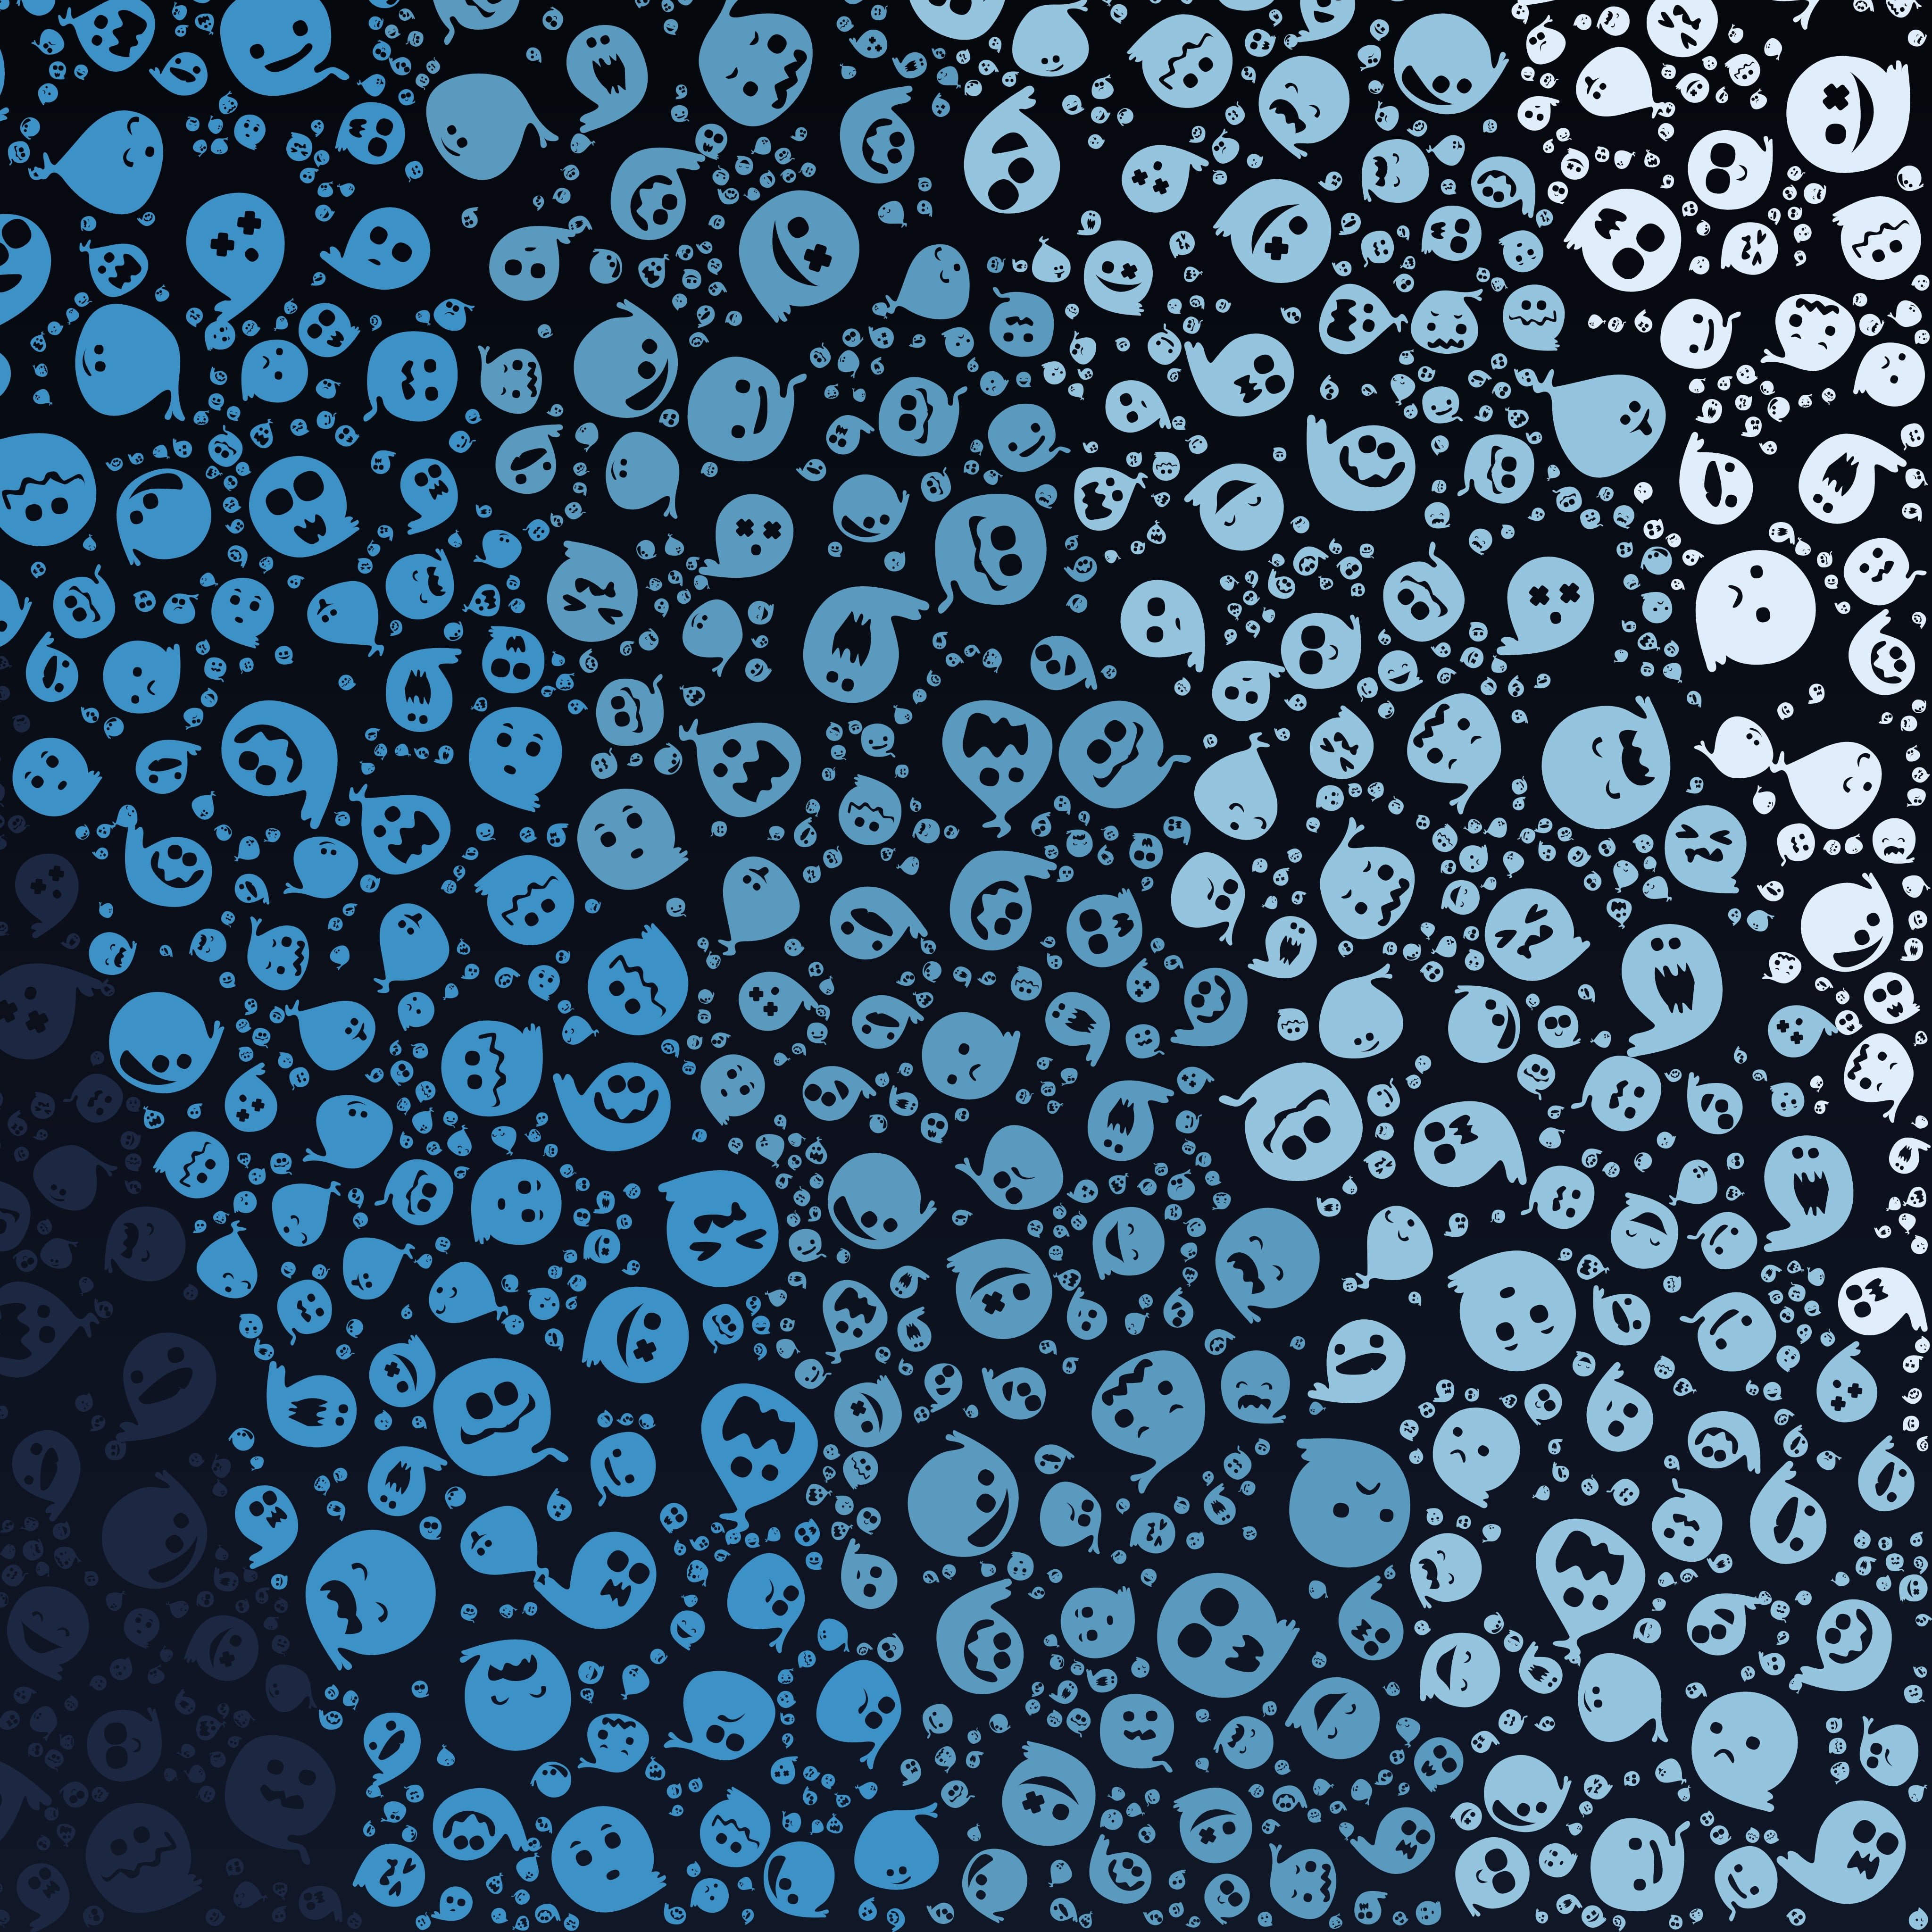 blue and black ghost illustration wallpaper, material style, simple